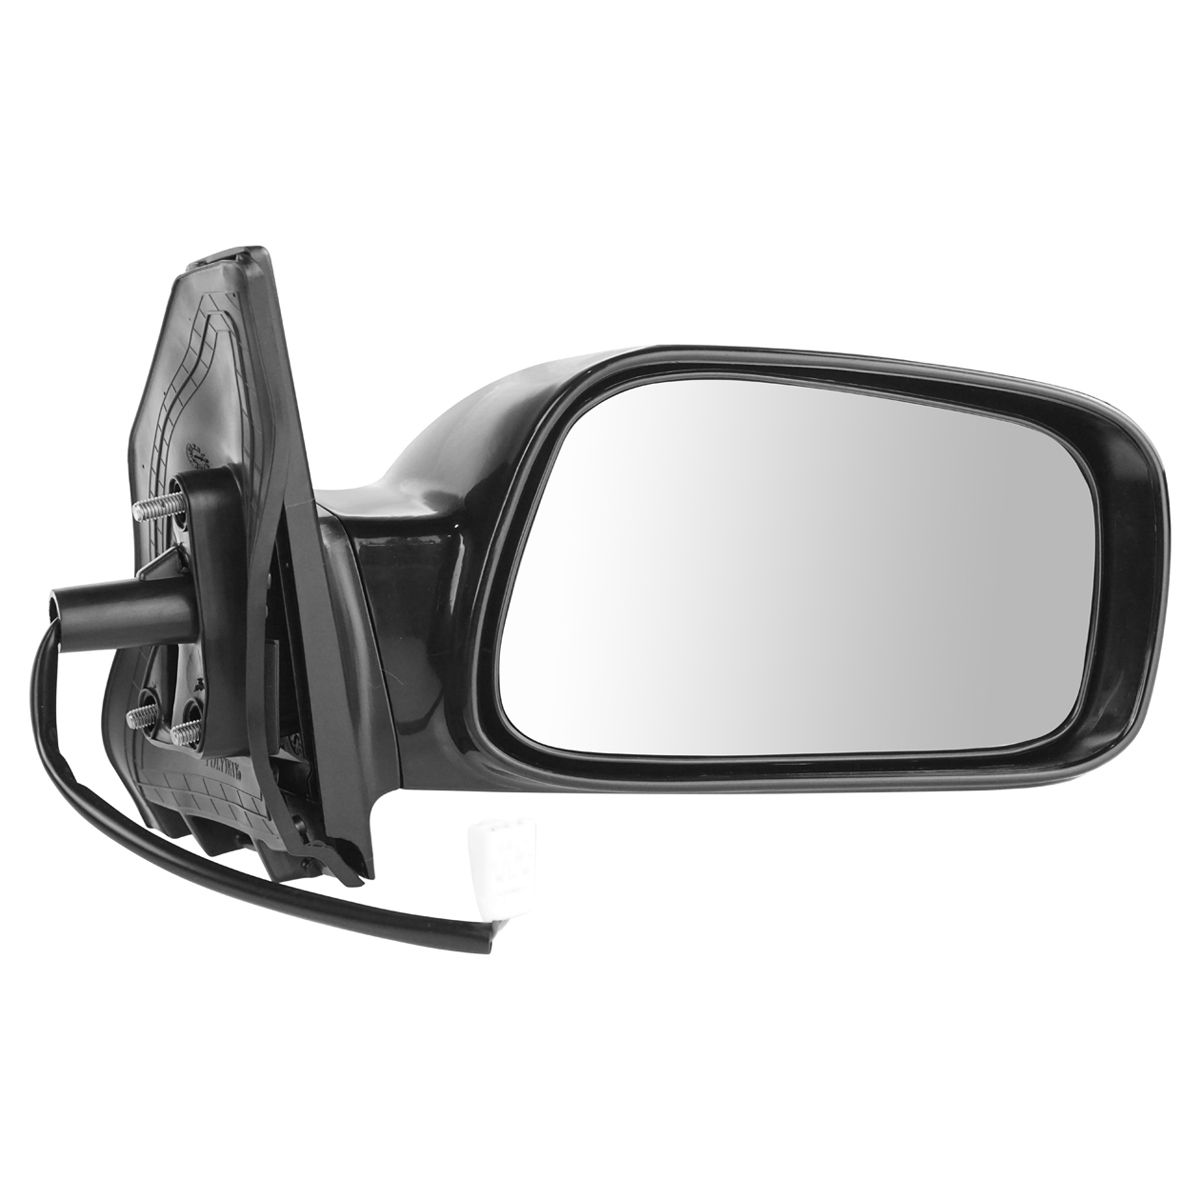 Side View Power Mirror Smooth Black Passenger Right RH for 03-08 Toyota Corolla | eBay 2006 Toyota Corolla Passenger Side Mirror Replacement